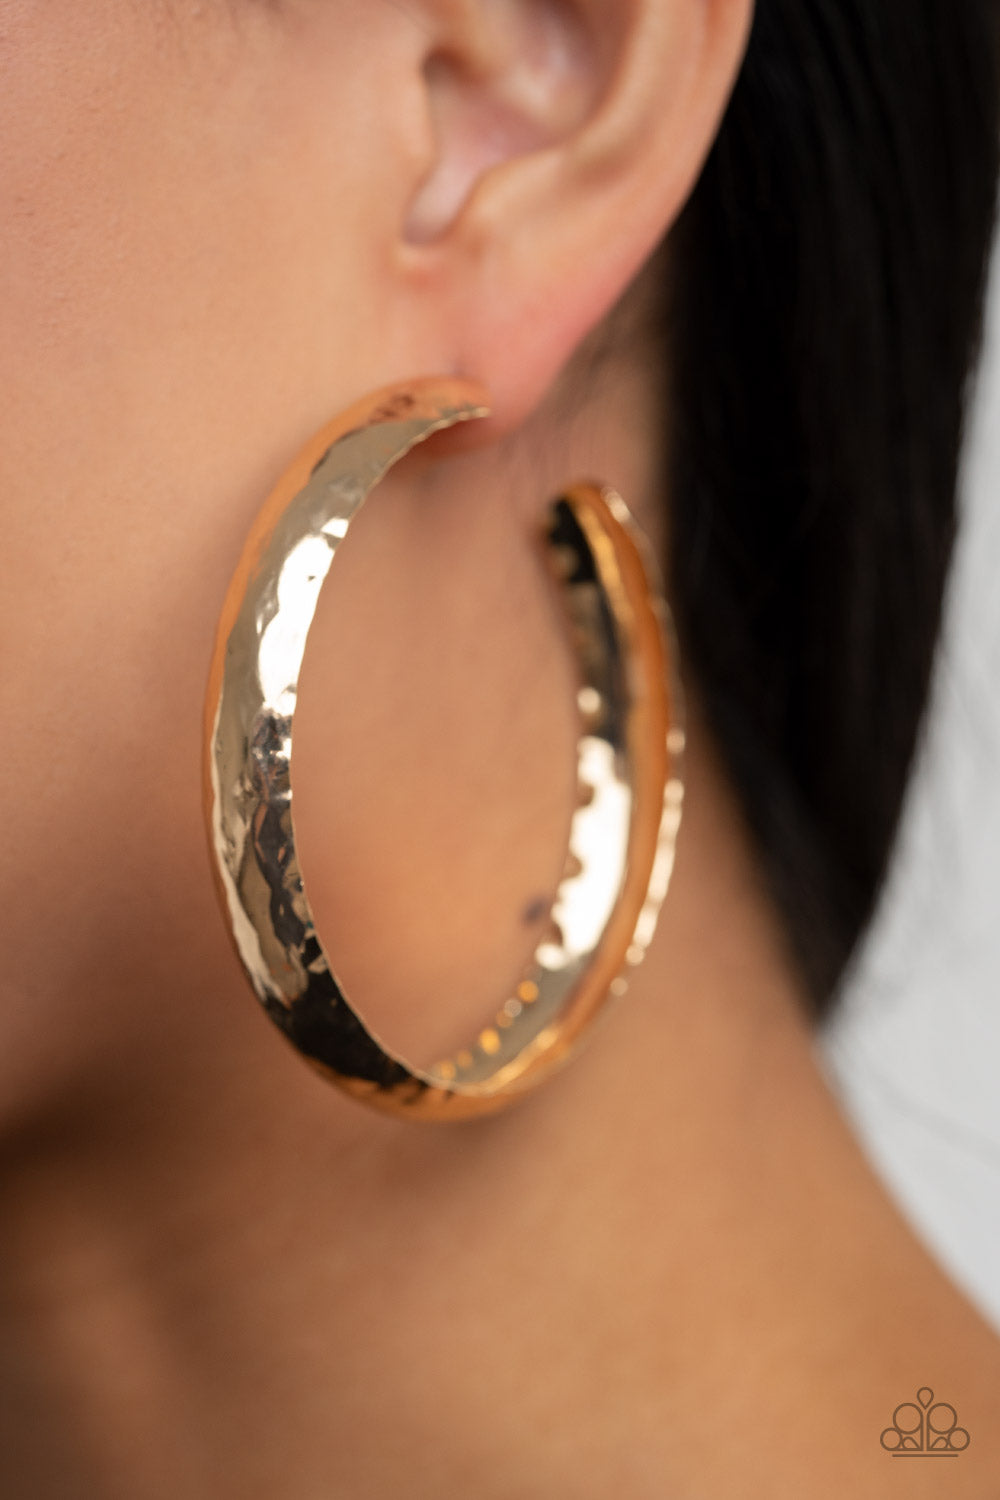 Check Out These Curves Gold-Earrings